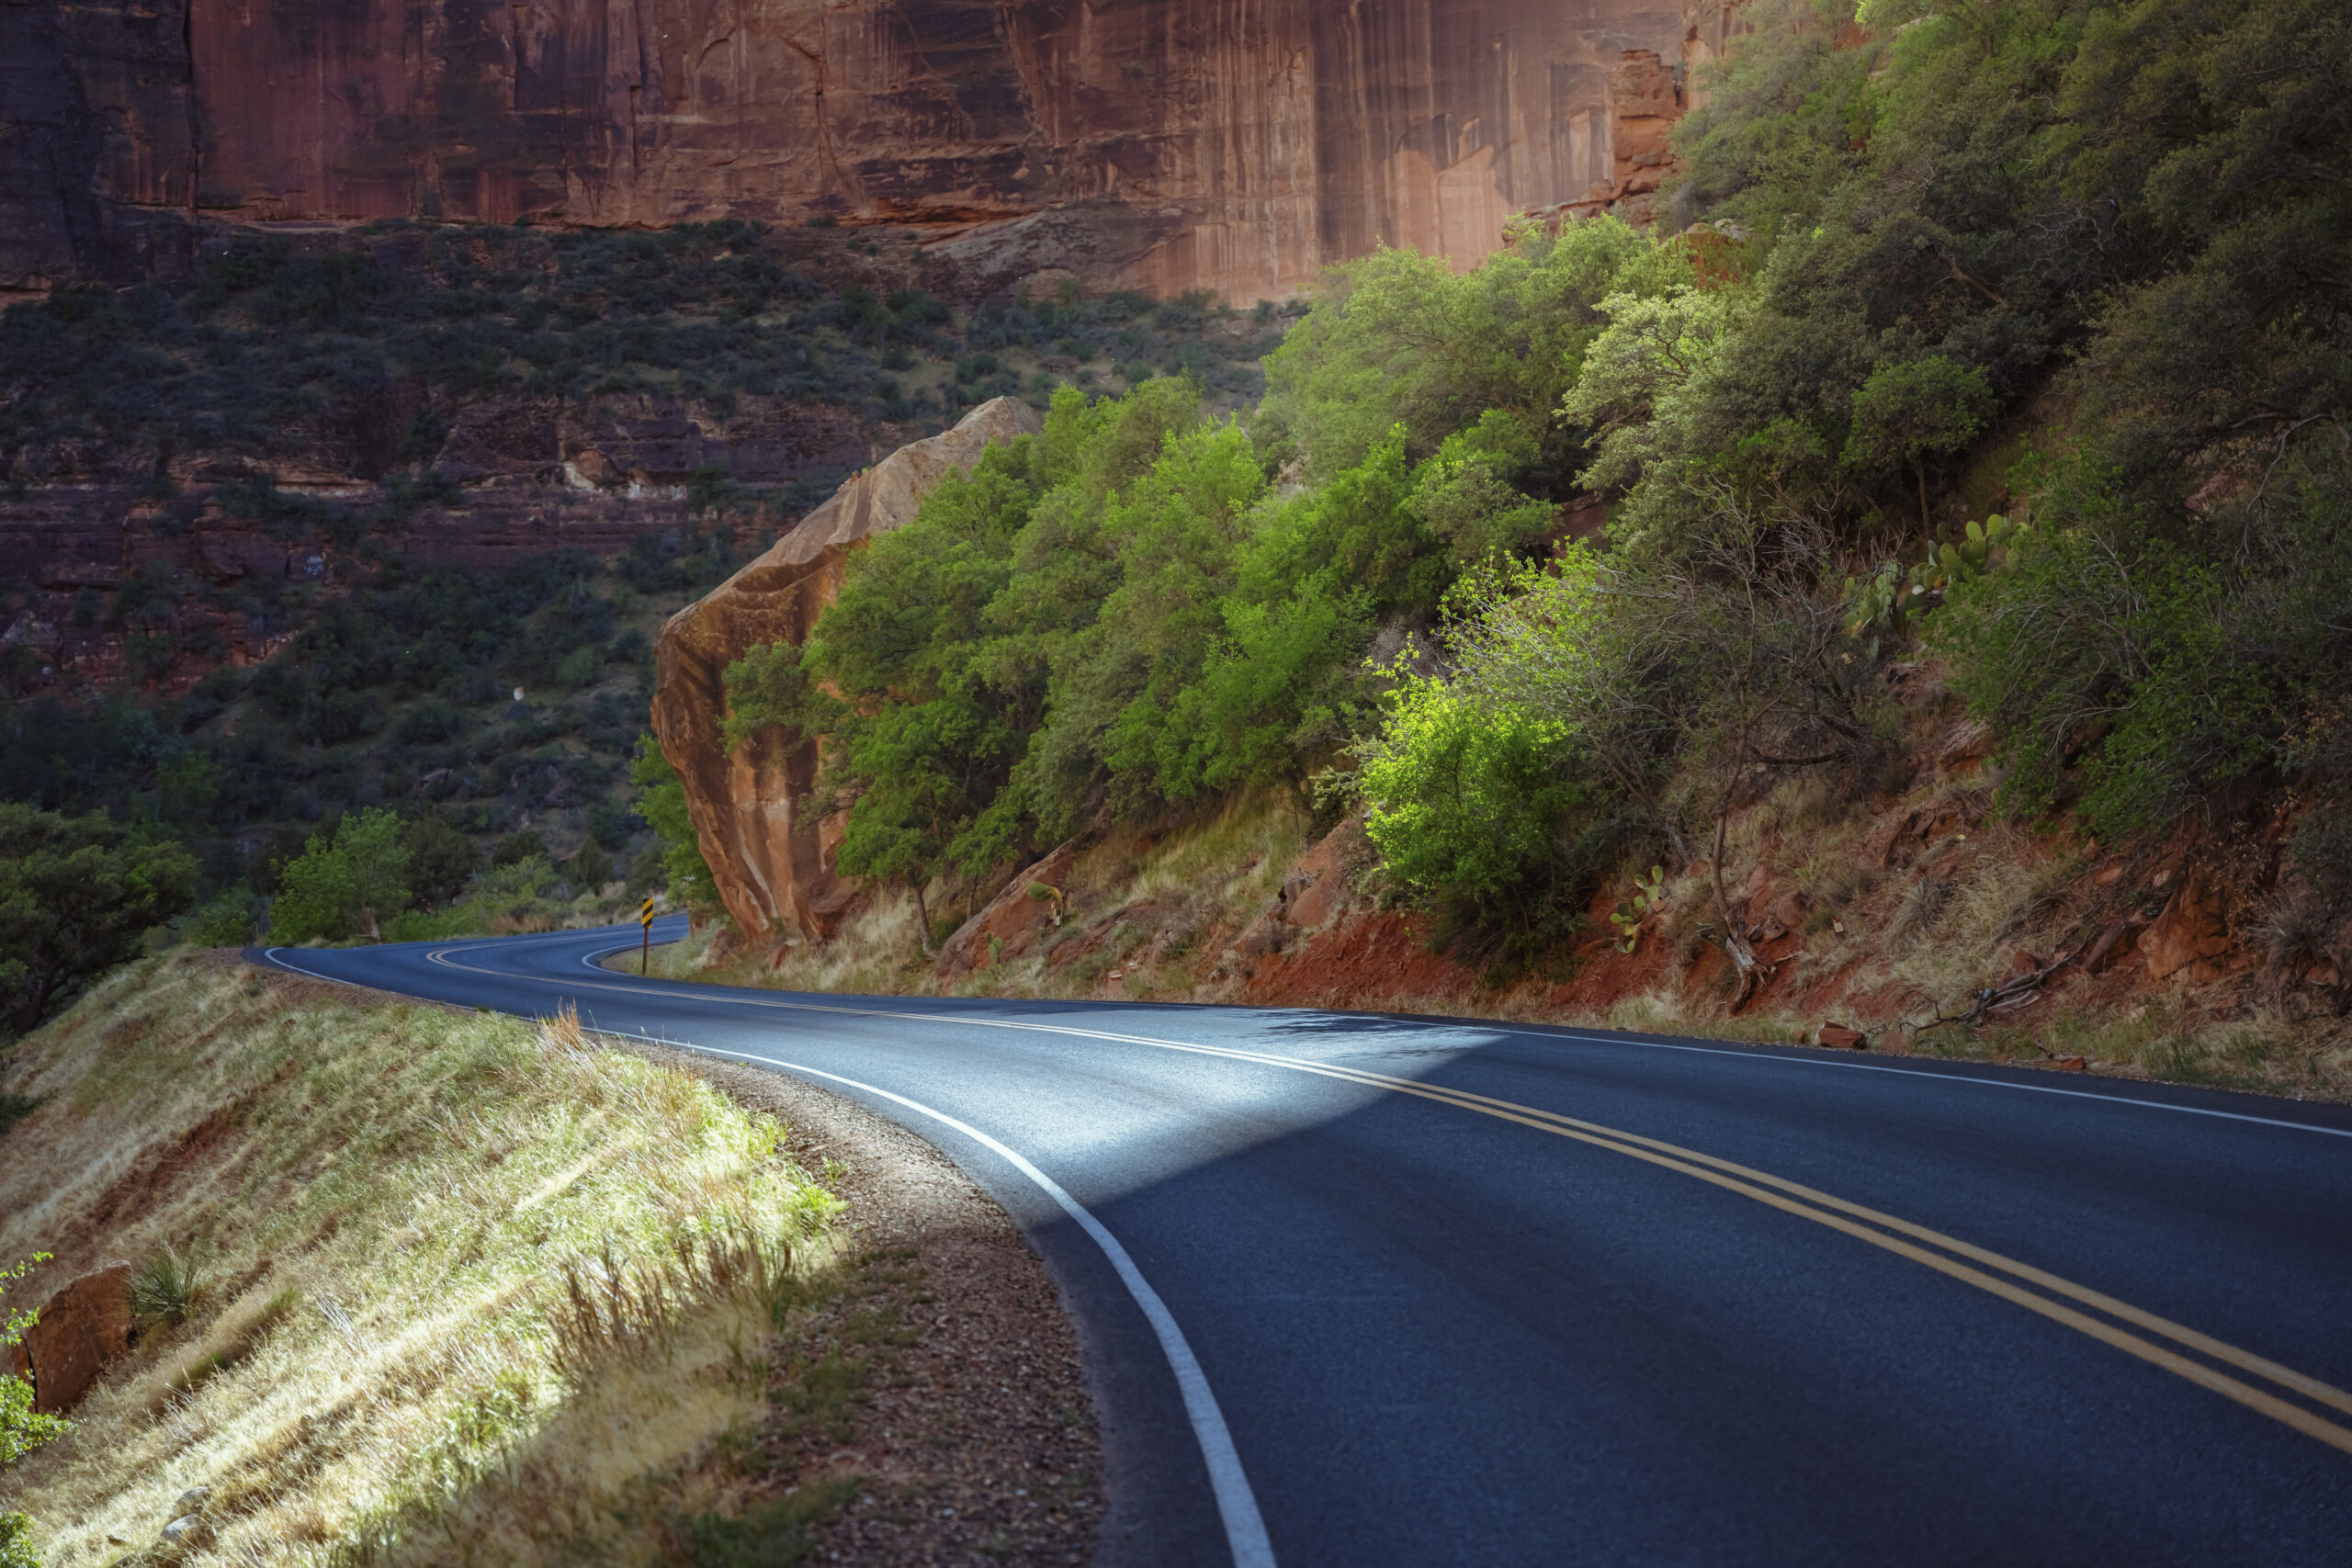 A view of the scenic drive up the canyon in Zion National Park.